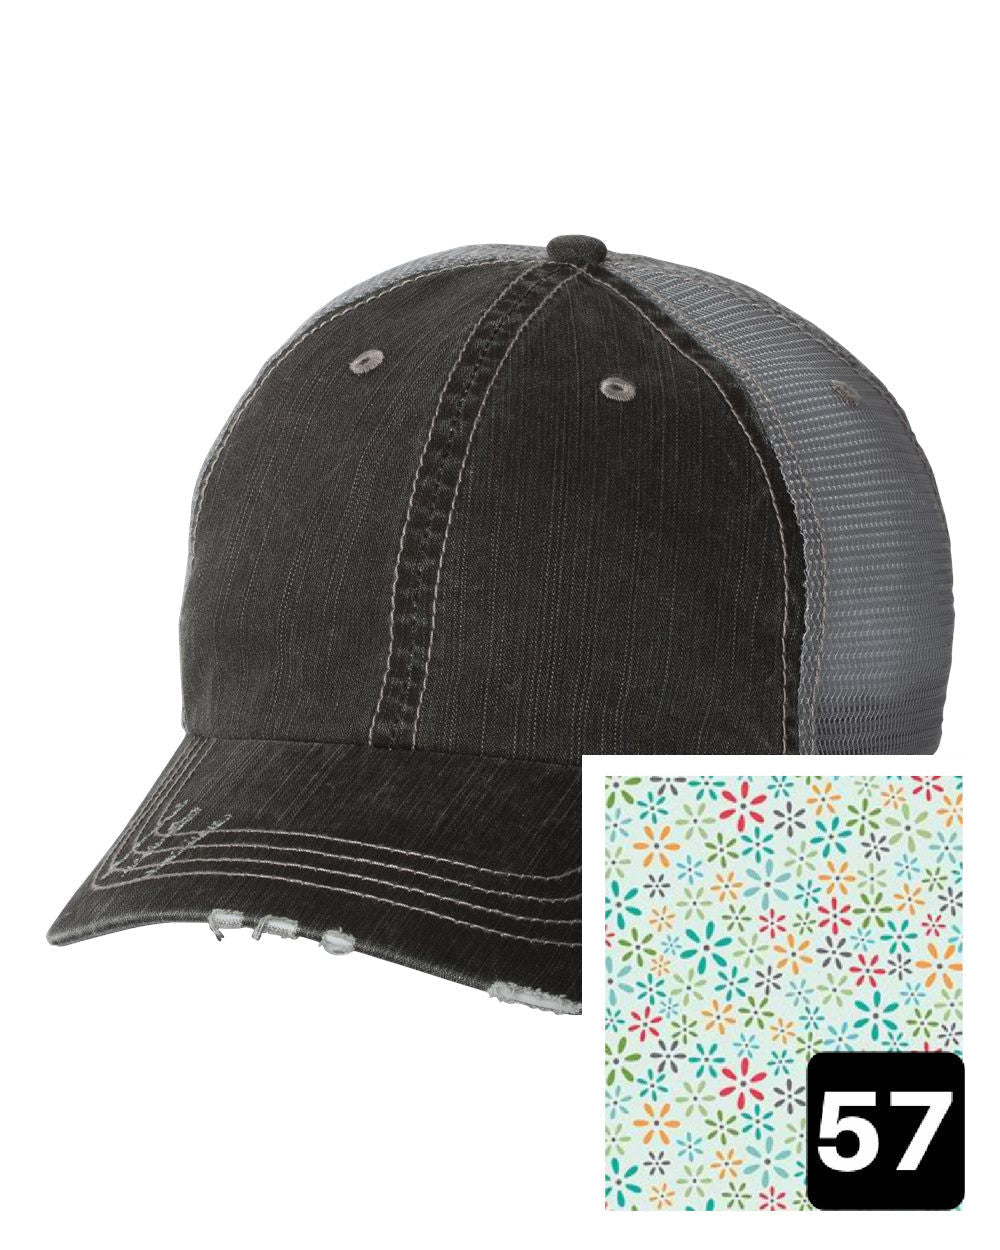 gray distressed trucker hat with white daisy on yellow fabric state of Oklahoma